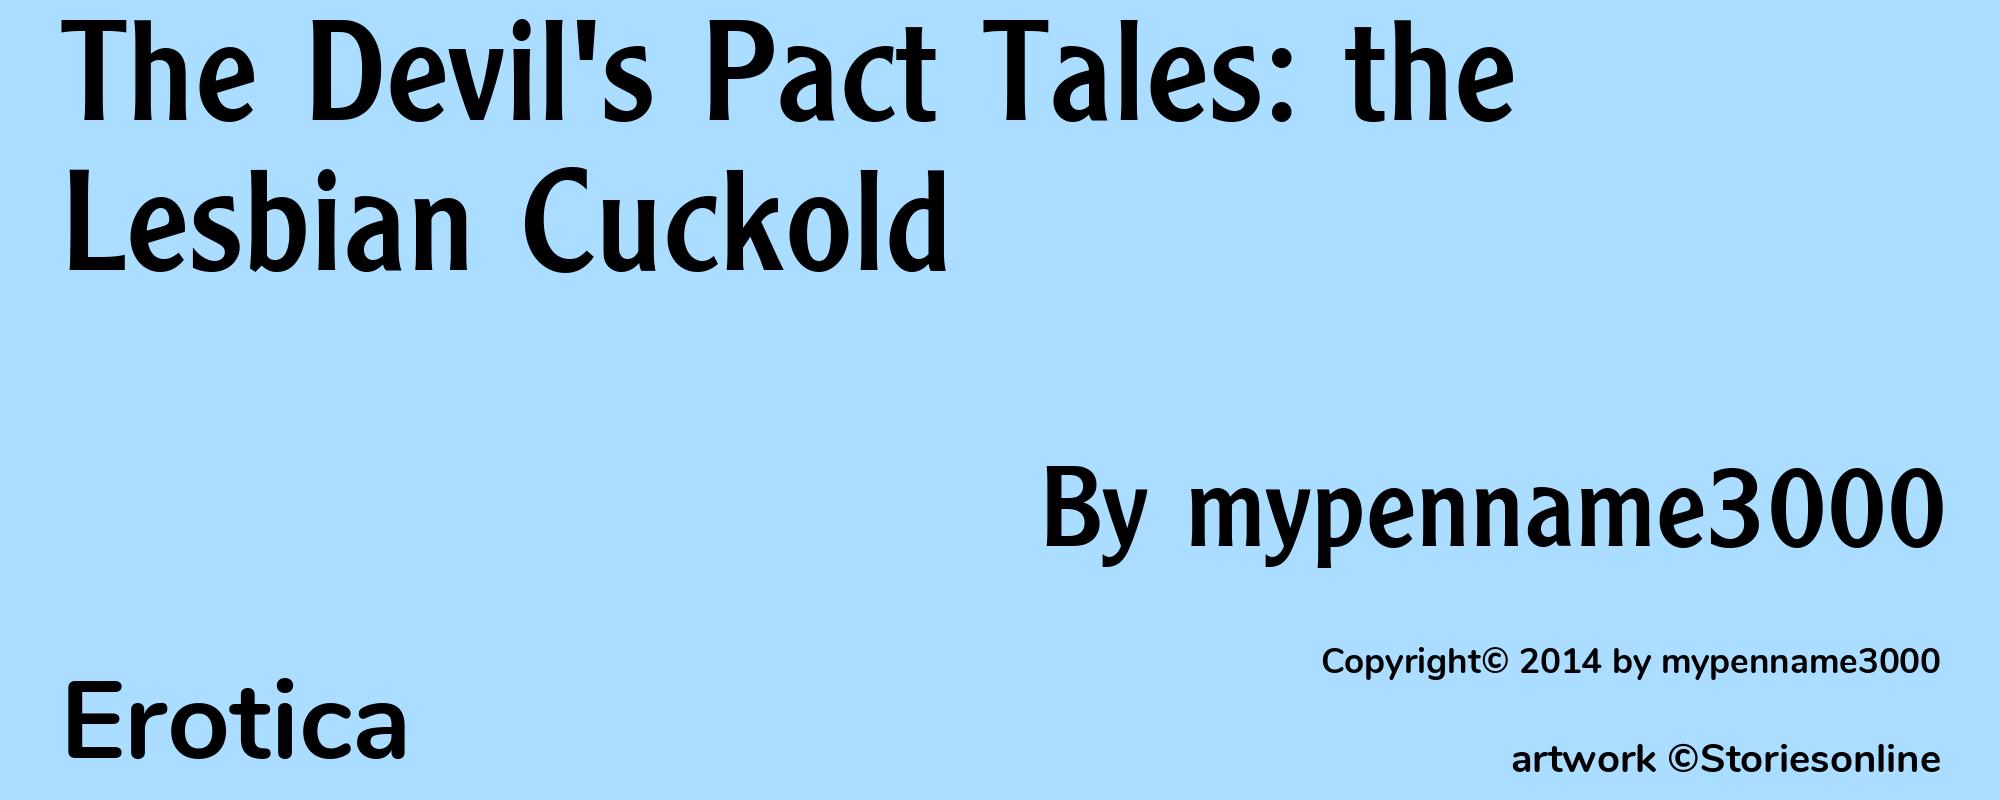 The Devil's Pact Tales: the Lesbian Cuckold - Cover